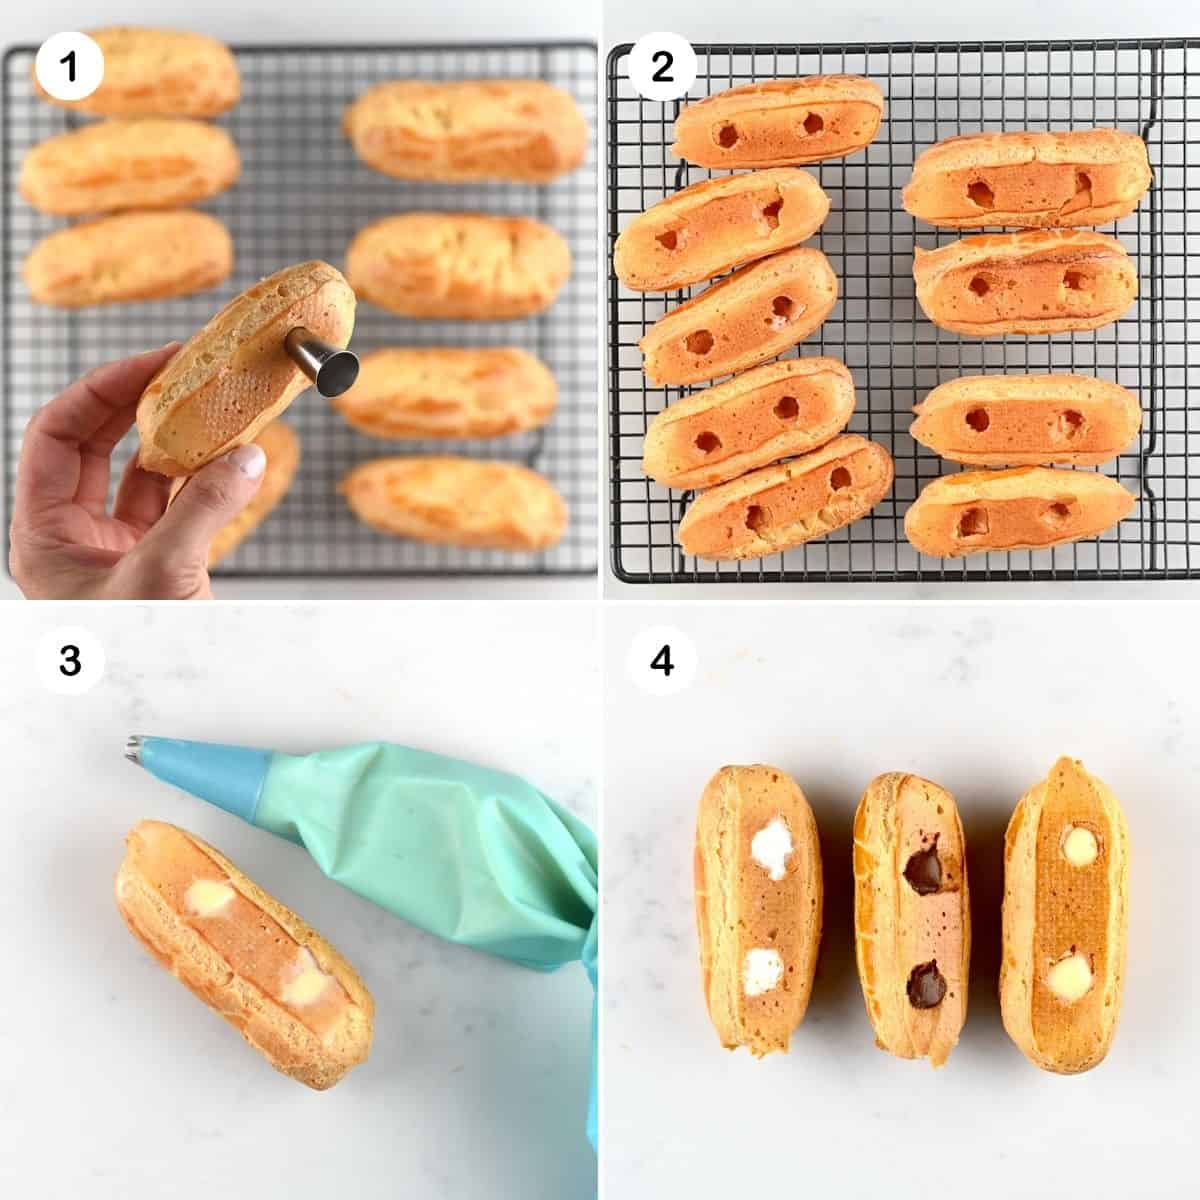 Steps for filling homemade eclairs